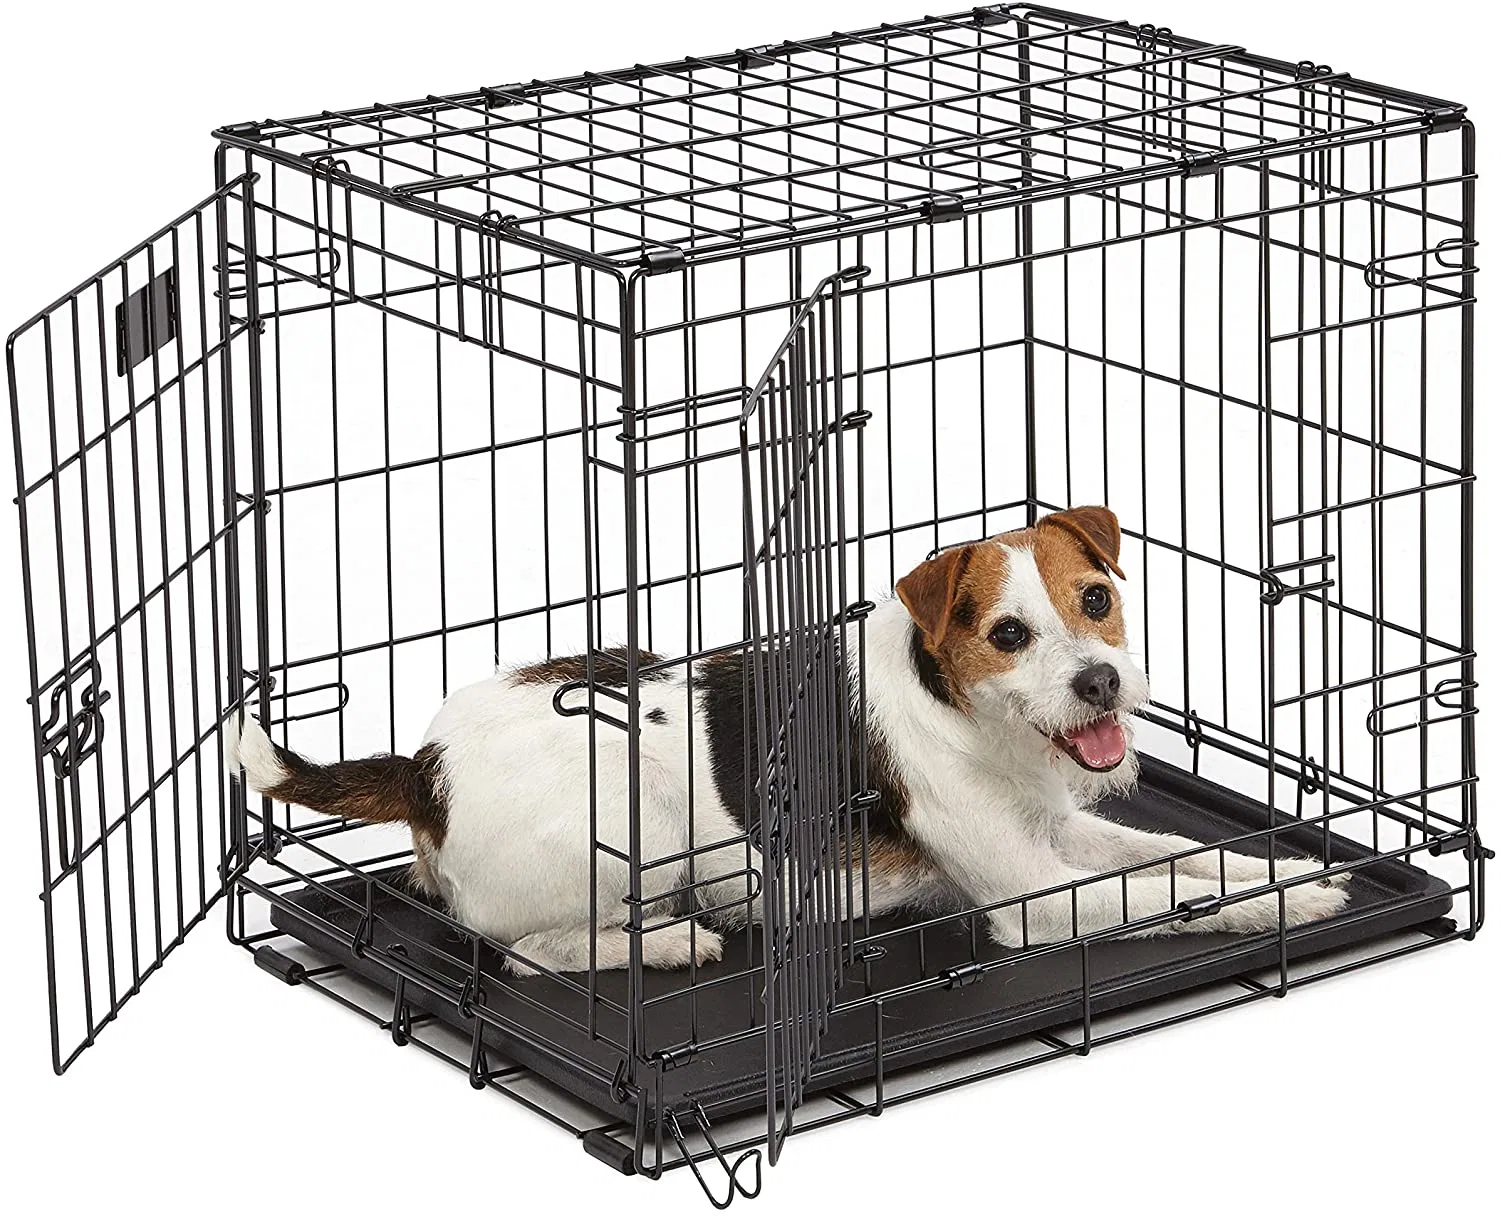 Wholesale/Supplier Price Large Outdoor Used Cheap Pet Dog Cage Kennel Carrier